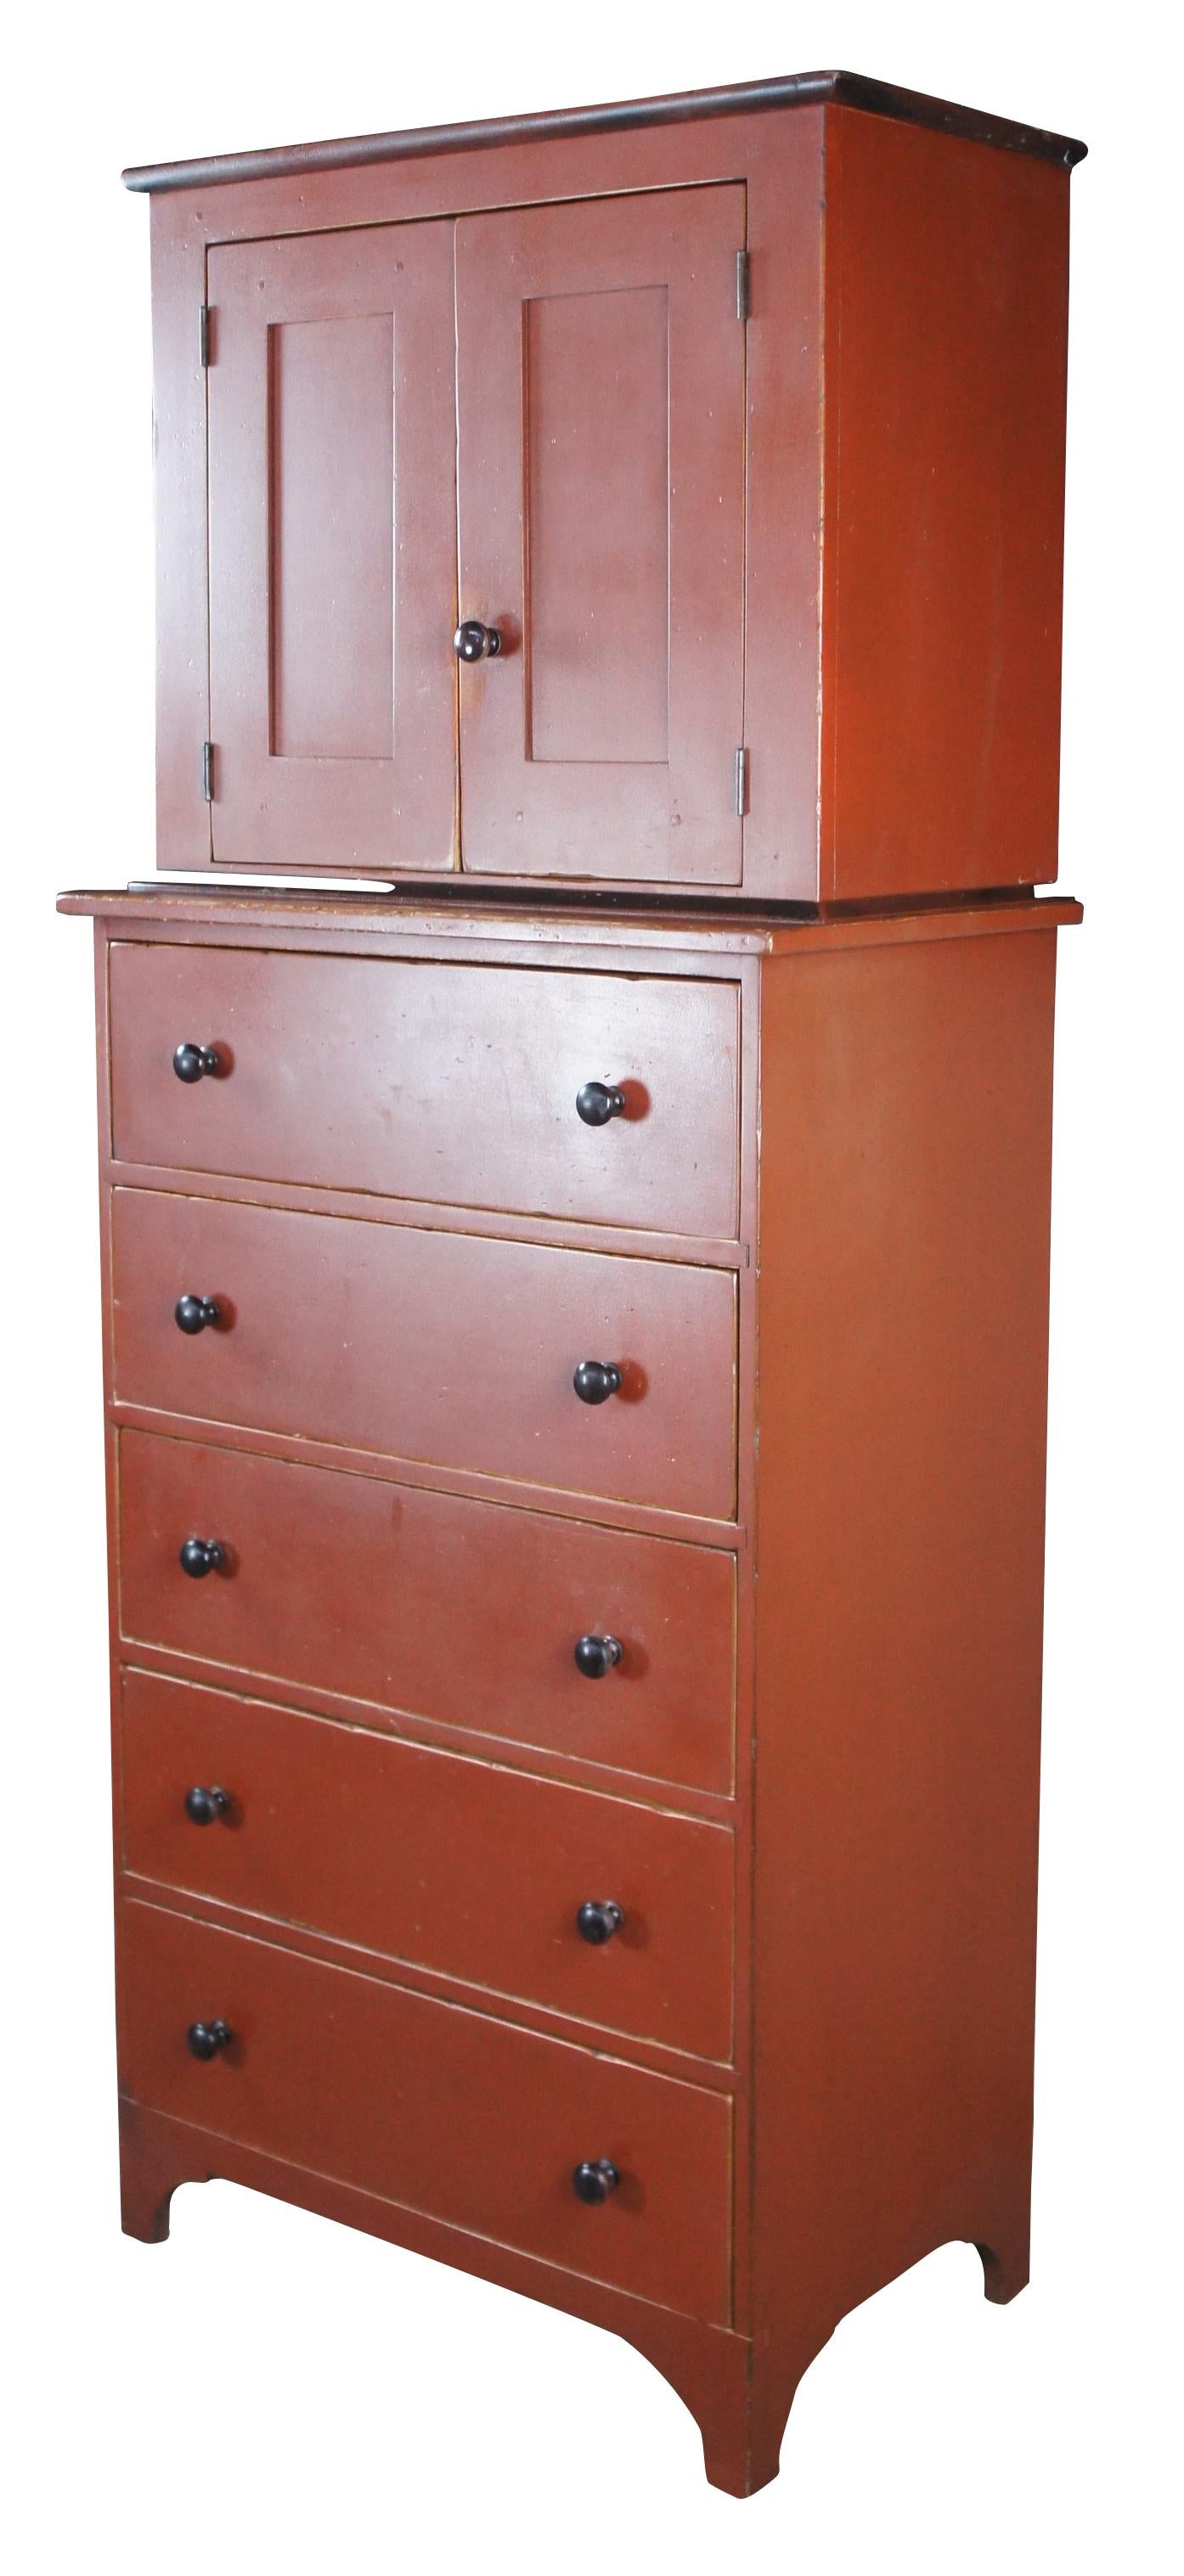 An impressive chest of drawers or linen press by David T Smith & Co of Morrow Ohio, circa 1986. Made from poplar with an old red crackled finish by artisan Jerry Ratliff. Features a tall case with wardrobe cabinet along the top. Includes mortise and